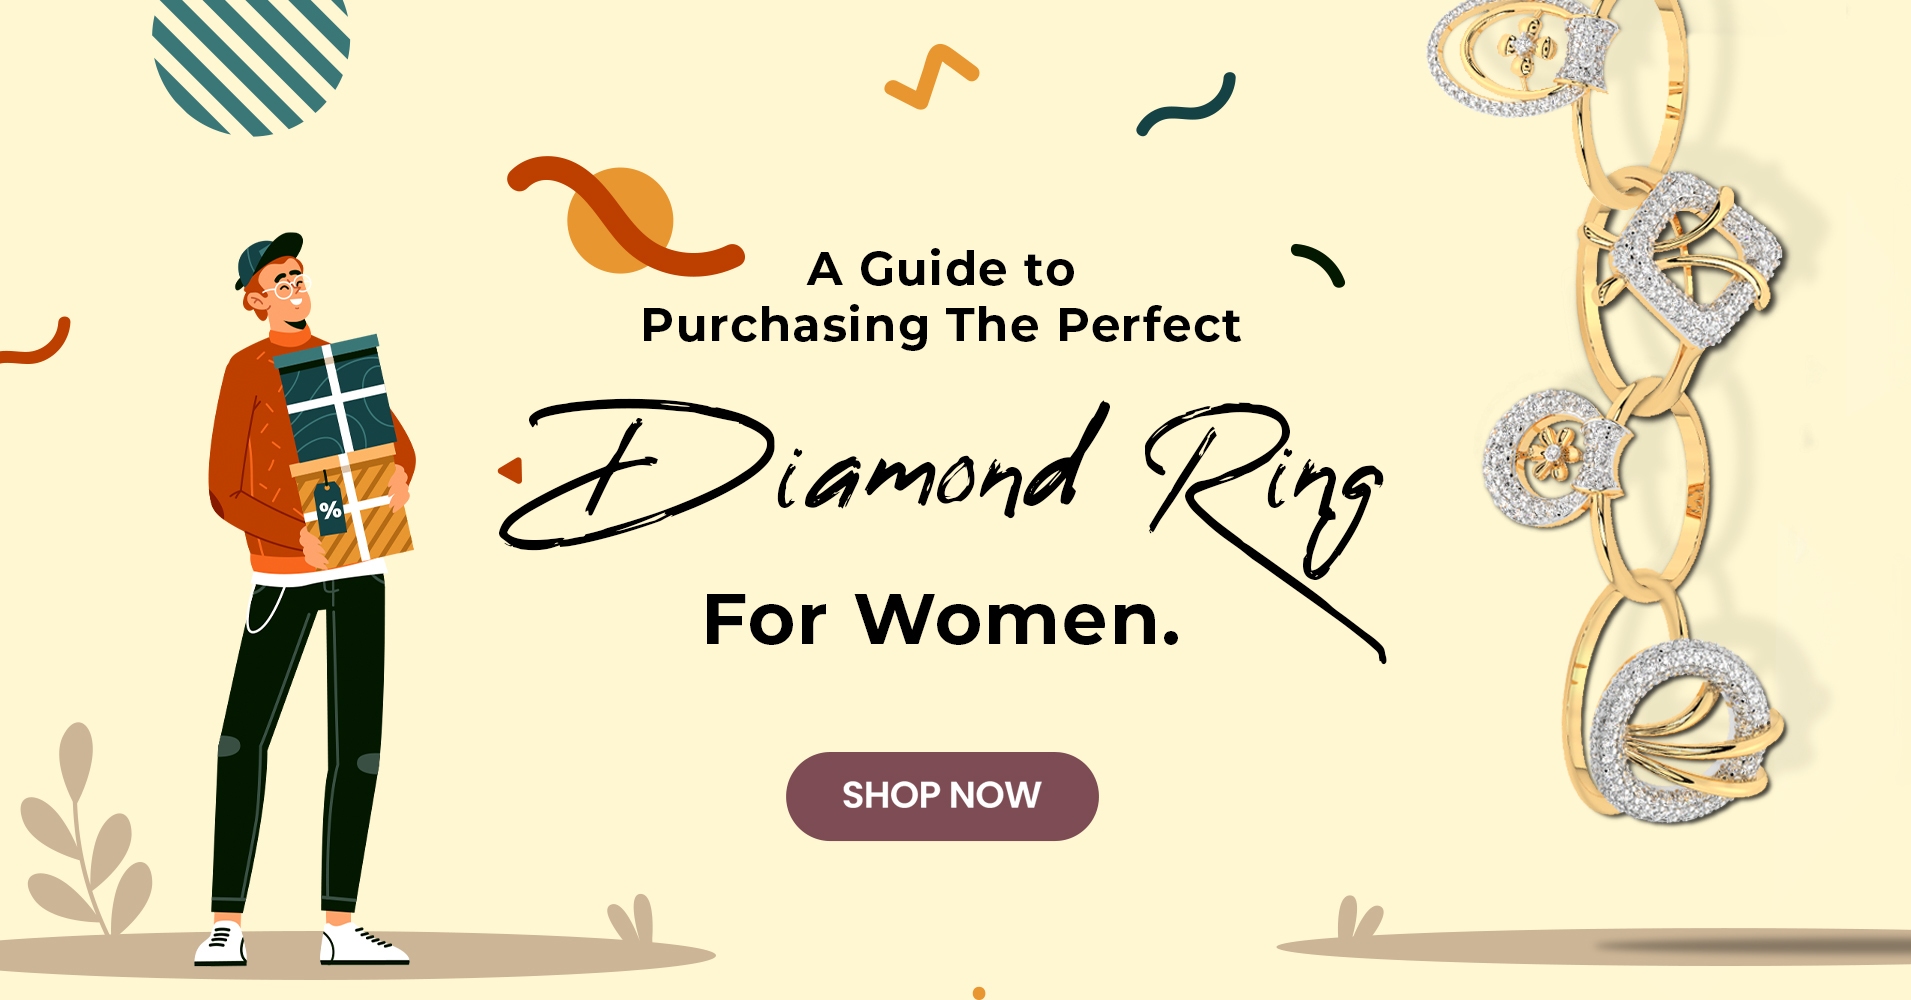 A Guide to Purchasing the Perfect Diamond Ring For Women